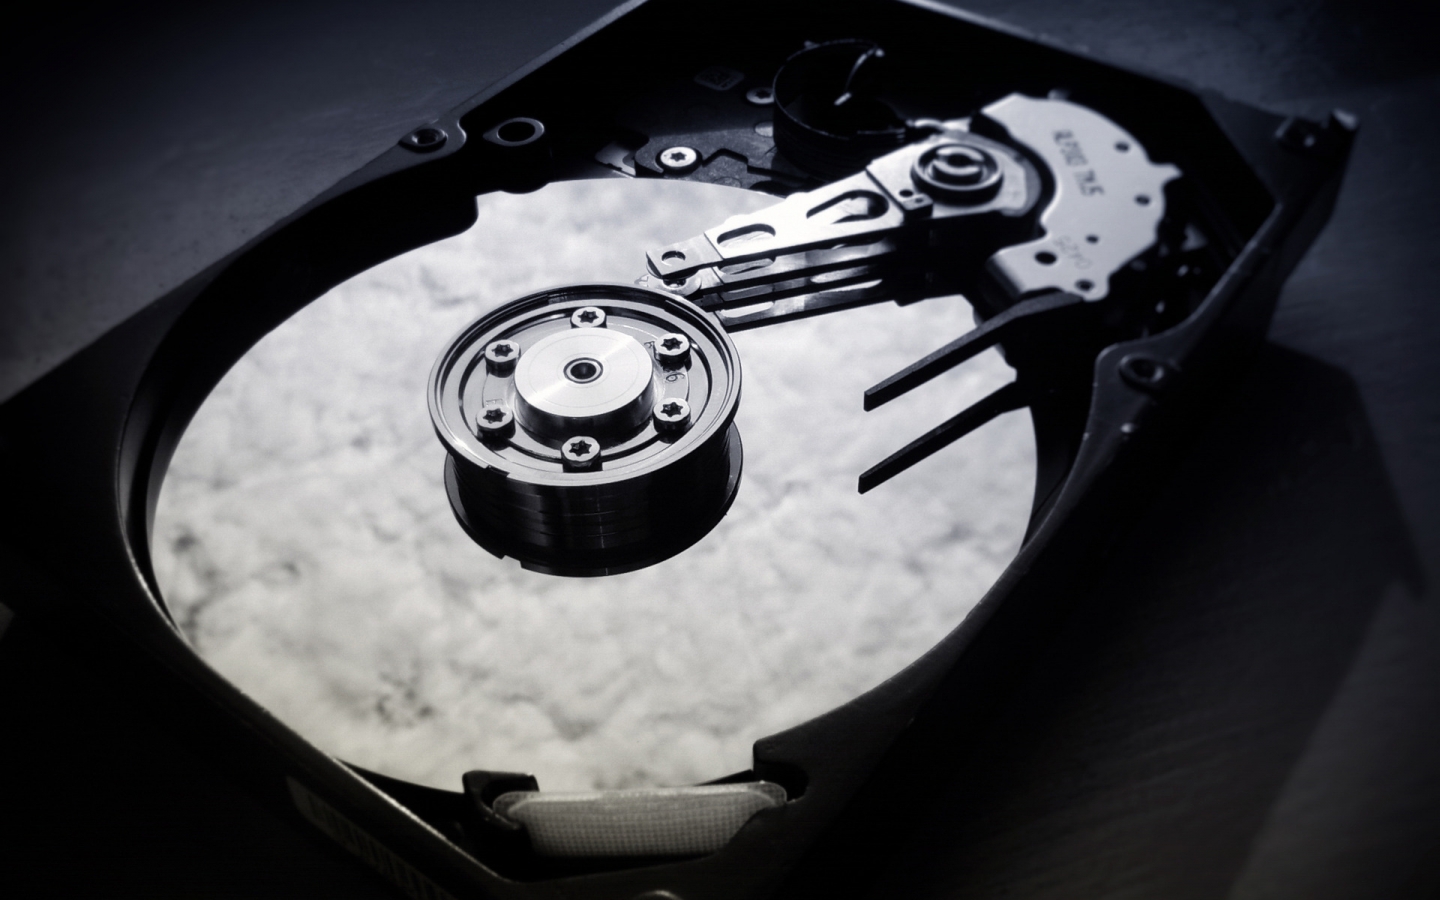 Hard Disk Drive for 1440 x 900 widescreen resolution